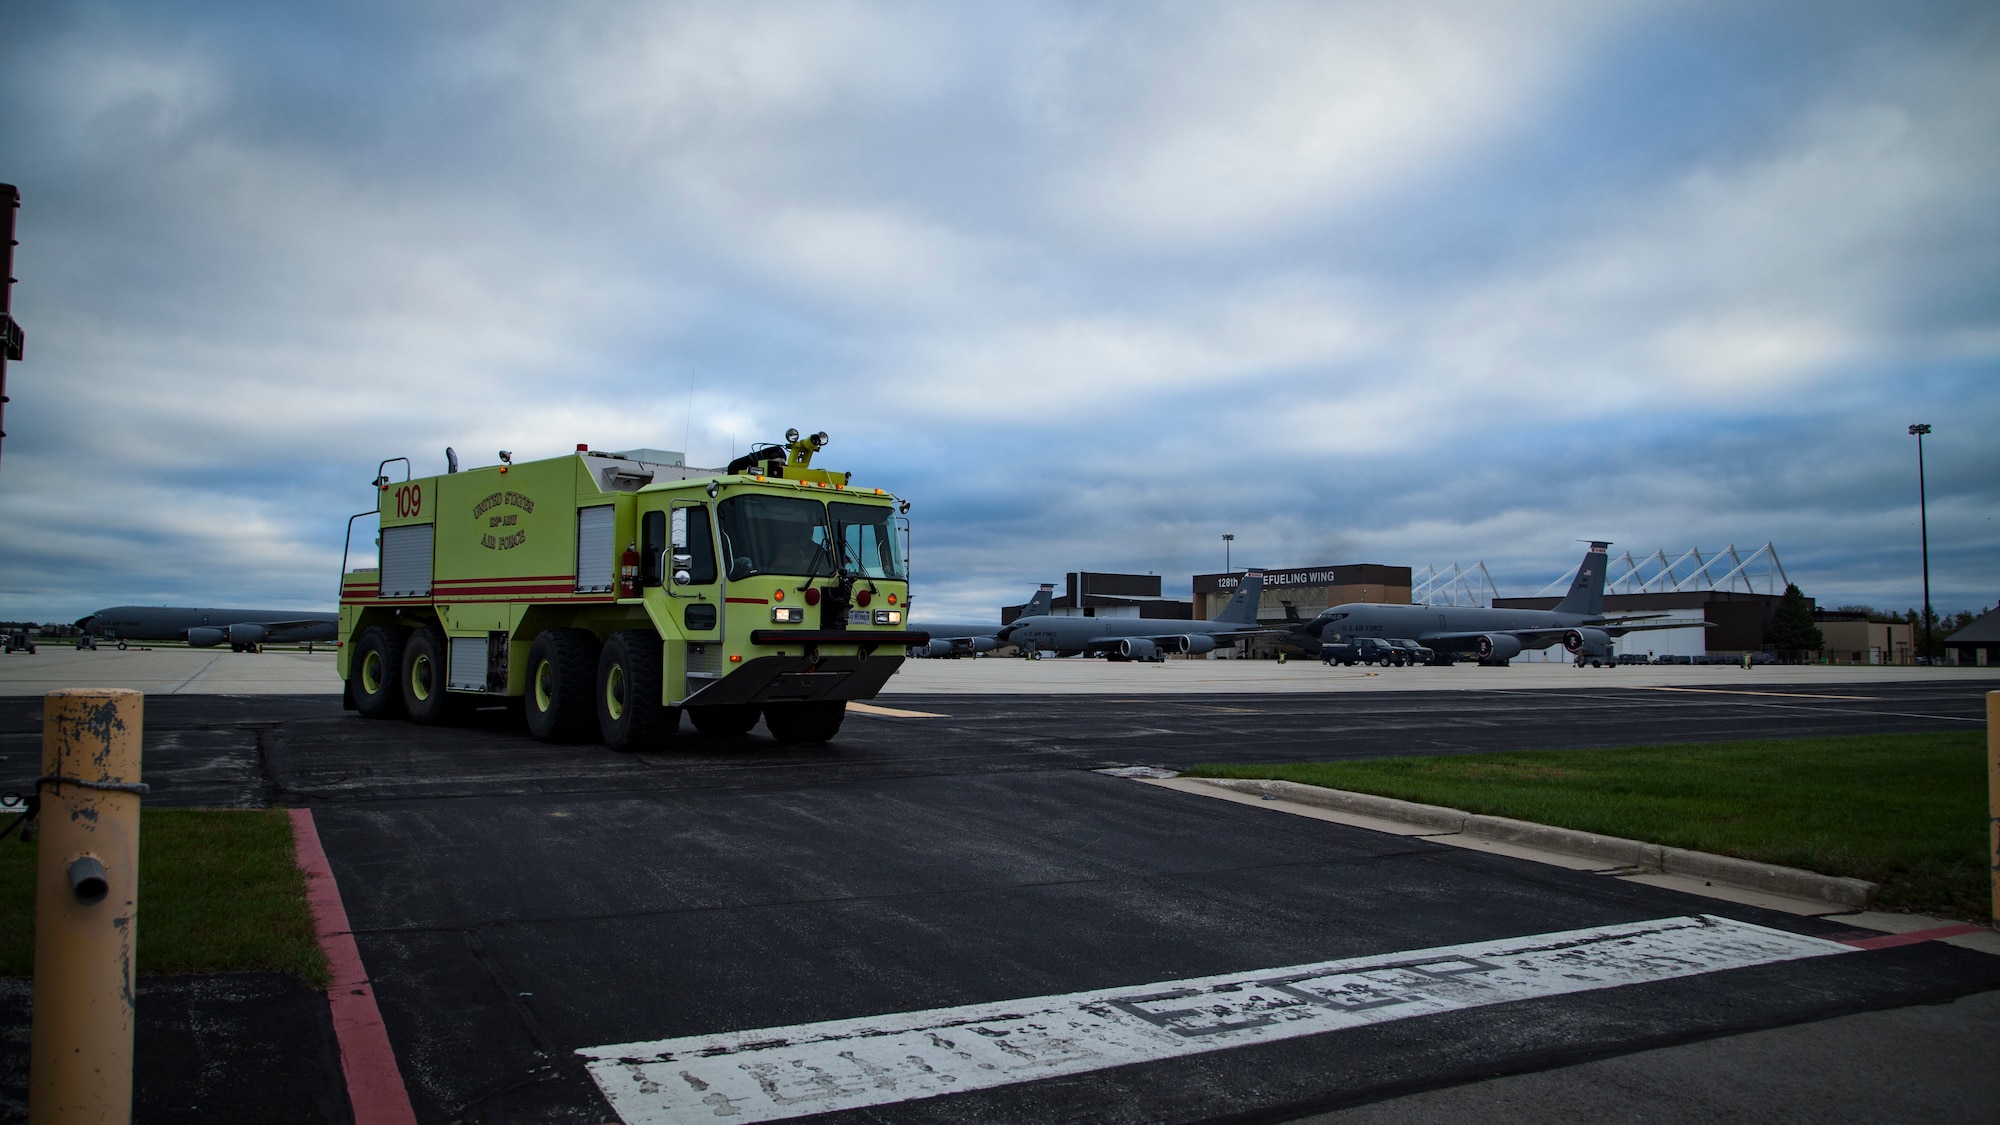 A U.S. Air Force fire protection truck assigned to the 128th Air Refueling Wing Fire Department sits on the ramp ready for response, Milwaukee, Wisconsin, Oct. 11, 2018.